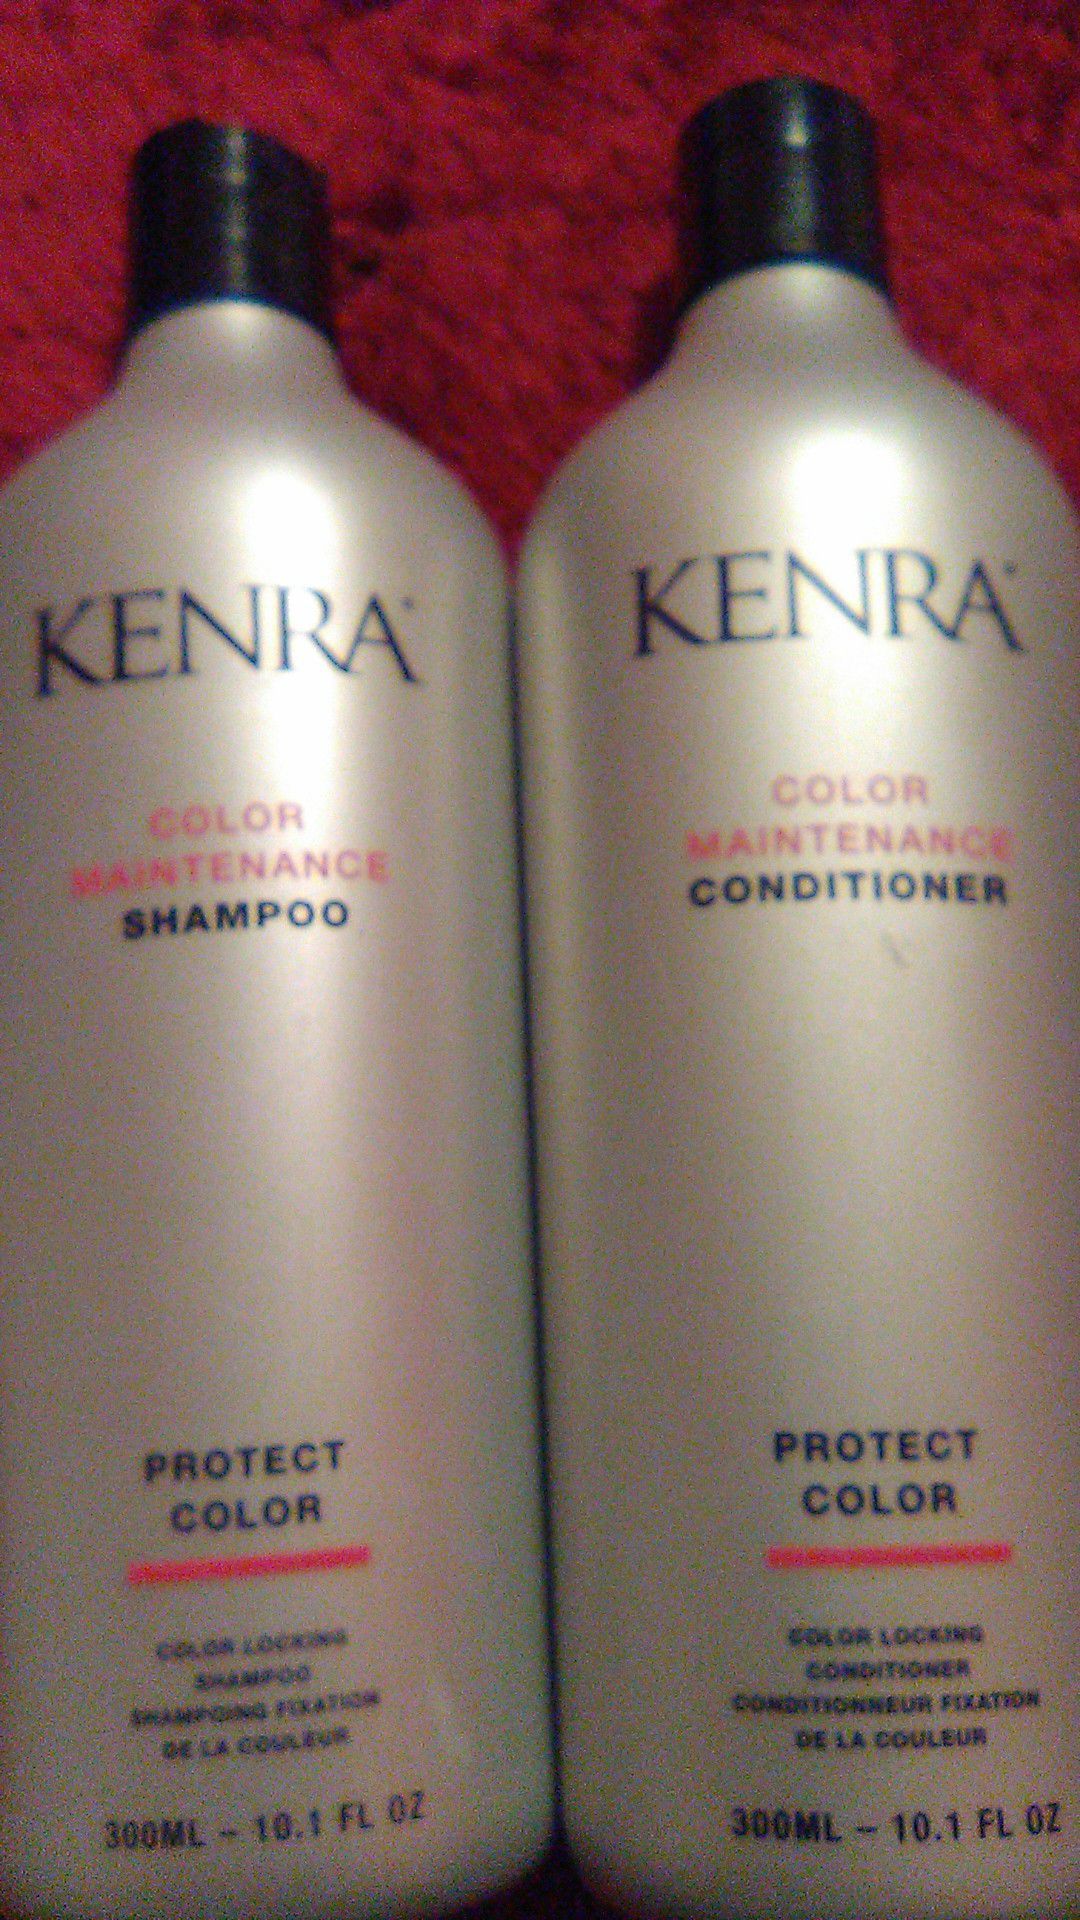 KENRA COLOR MAINTENANCE SHAMPOO AND CONDITIONER